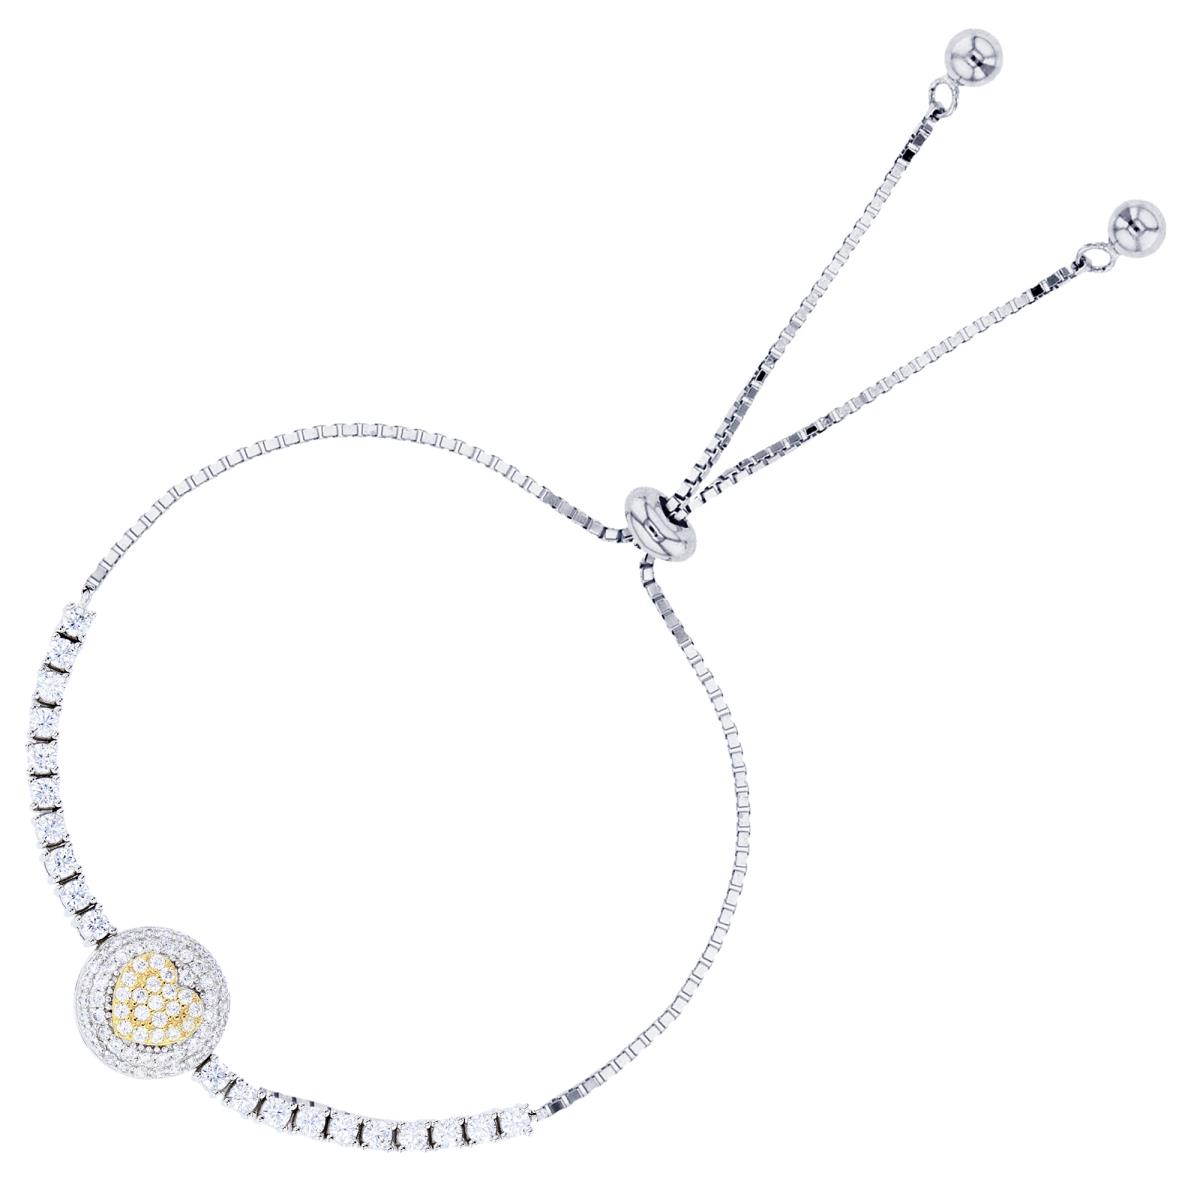 Sterling Silver Two-Tone (W/Y) Rnd White CZ Puffy Circle Cluster with Row on Sides Adjustable Bolo Bracelet